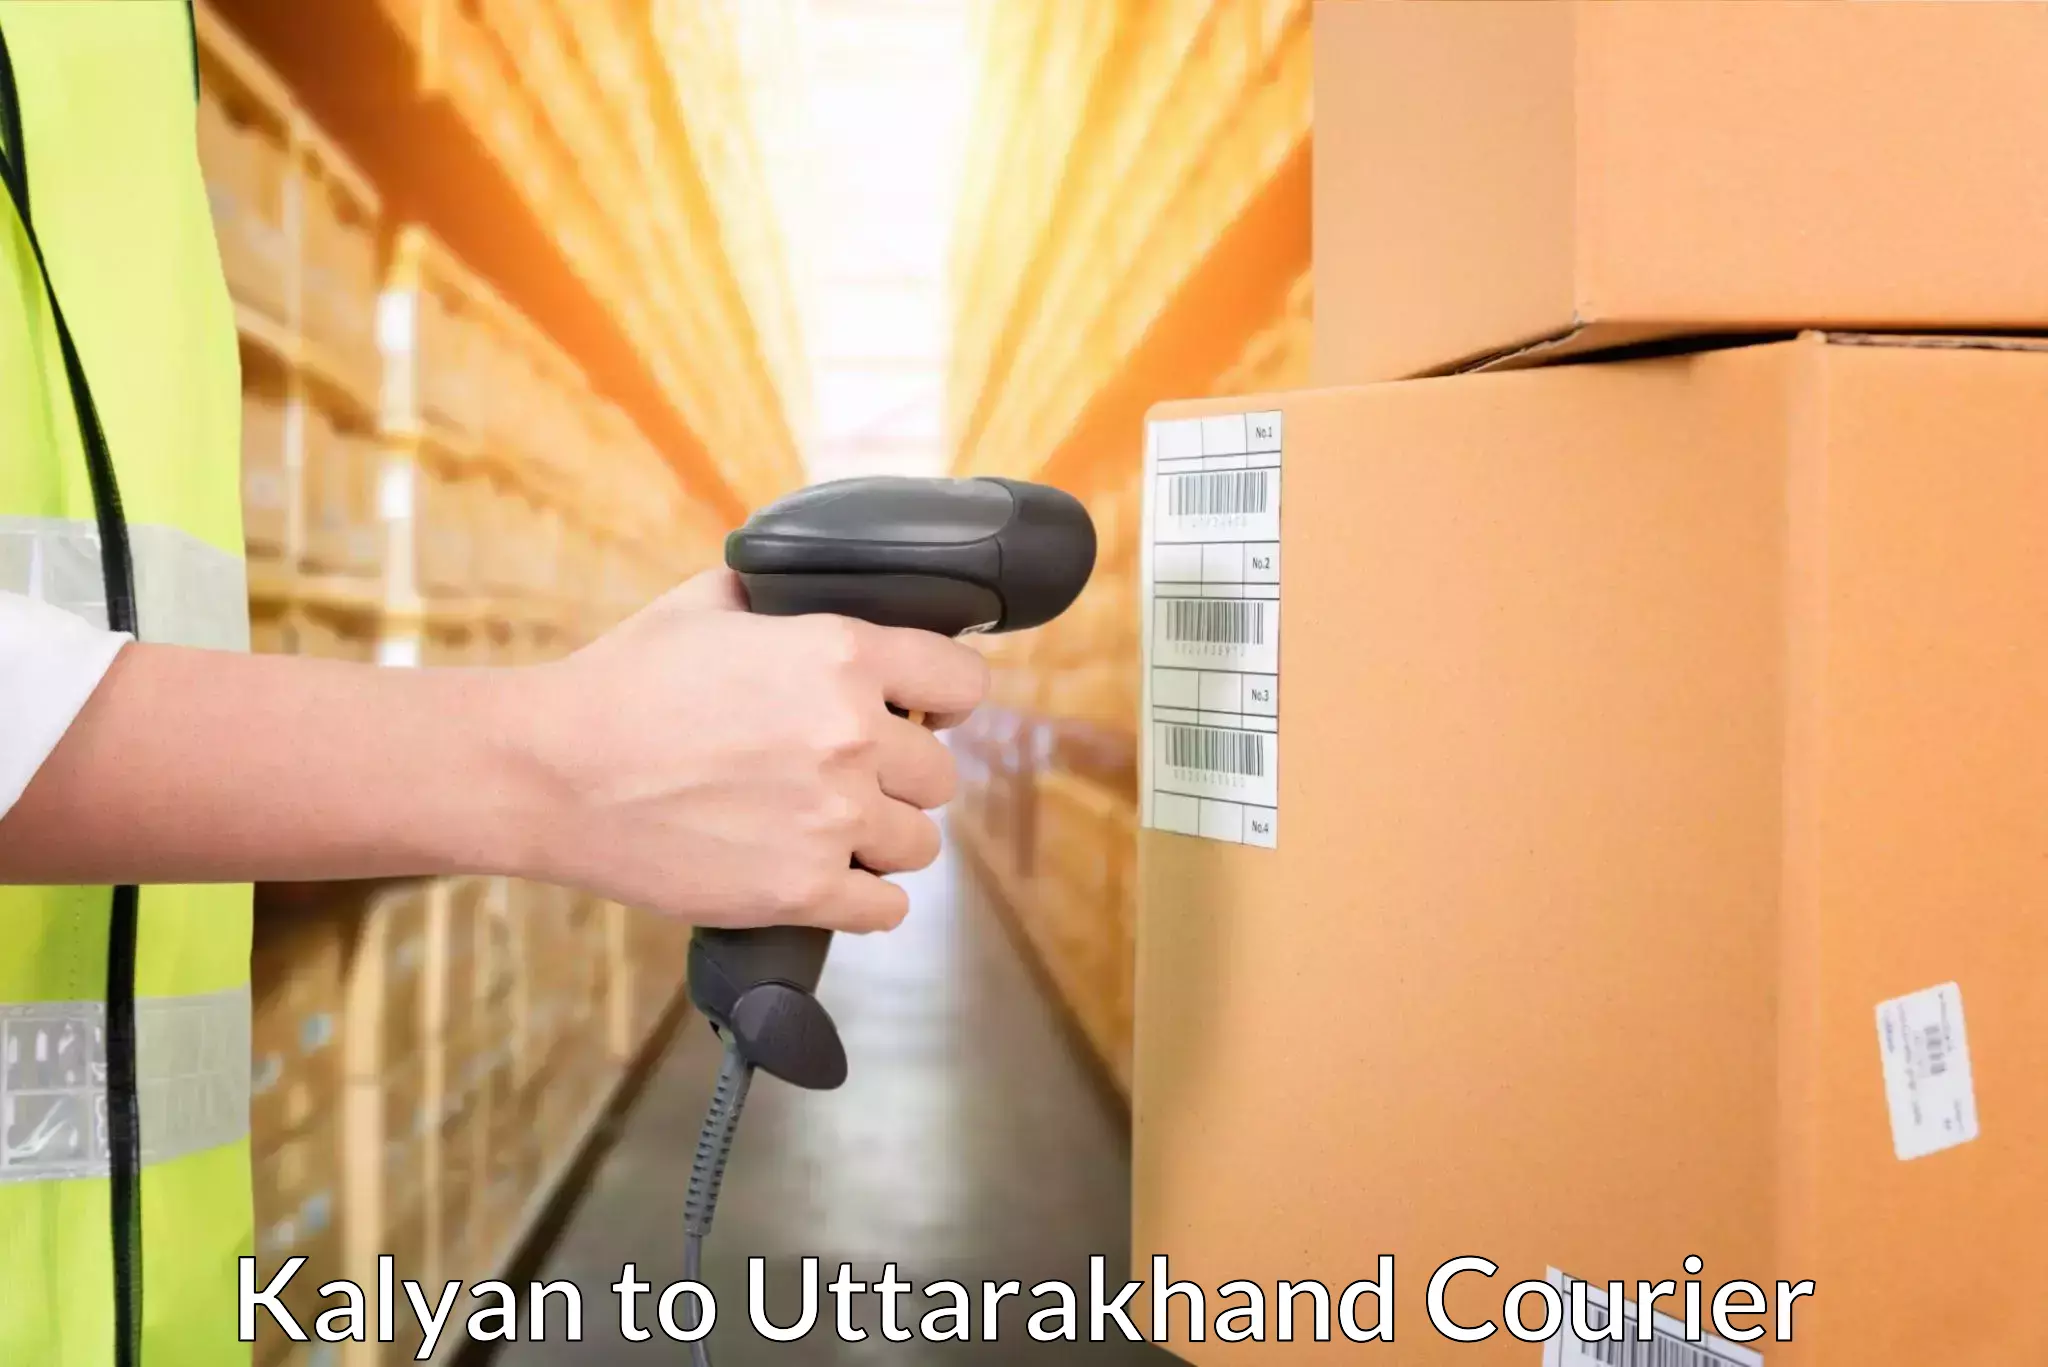 Easy access courier services in Kalyan to Uttarakhand